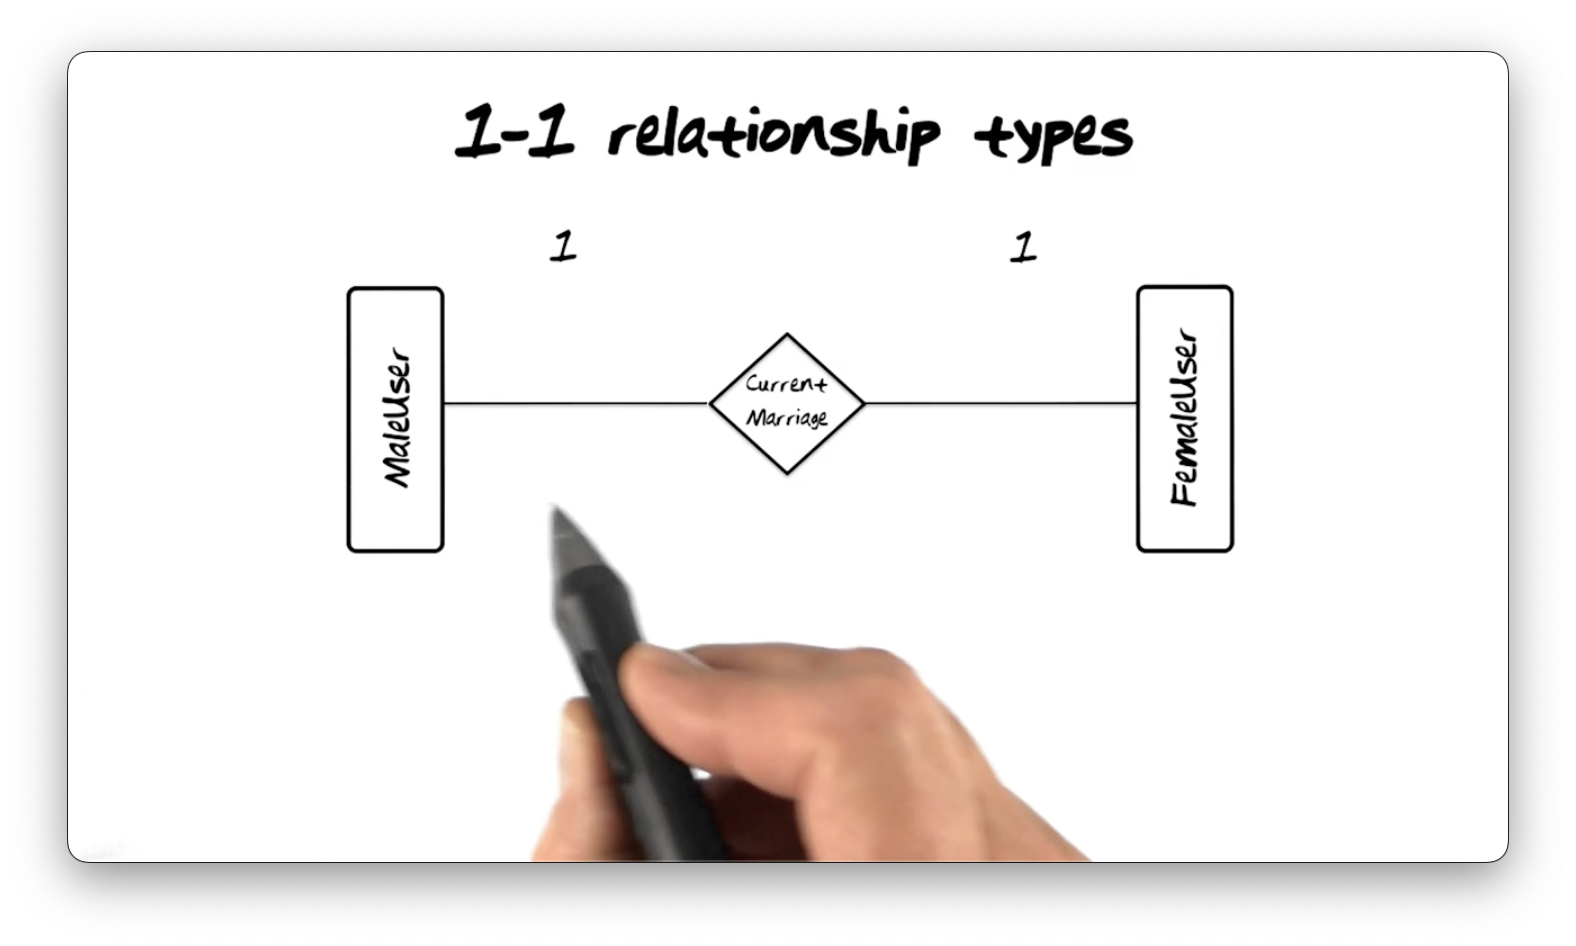 A current marriage relationship type between a female user and a male
user.